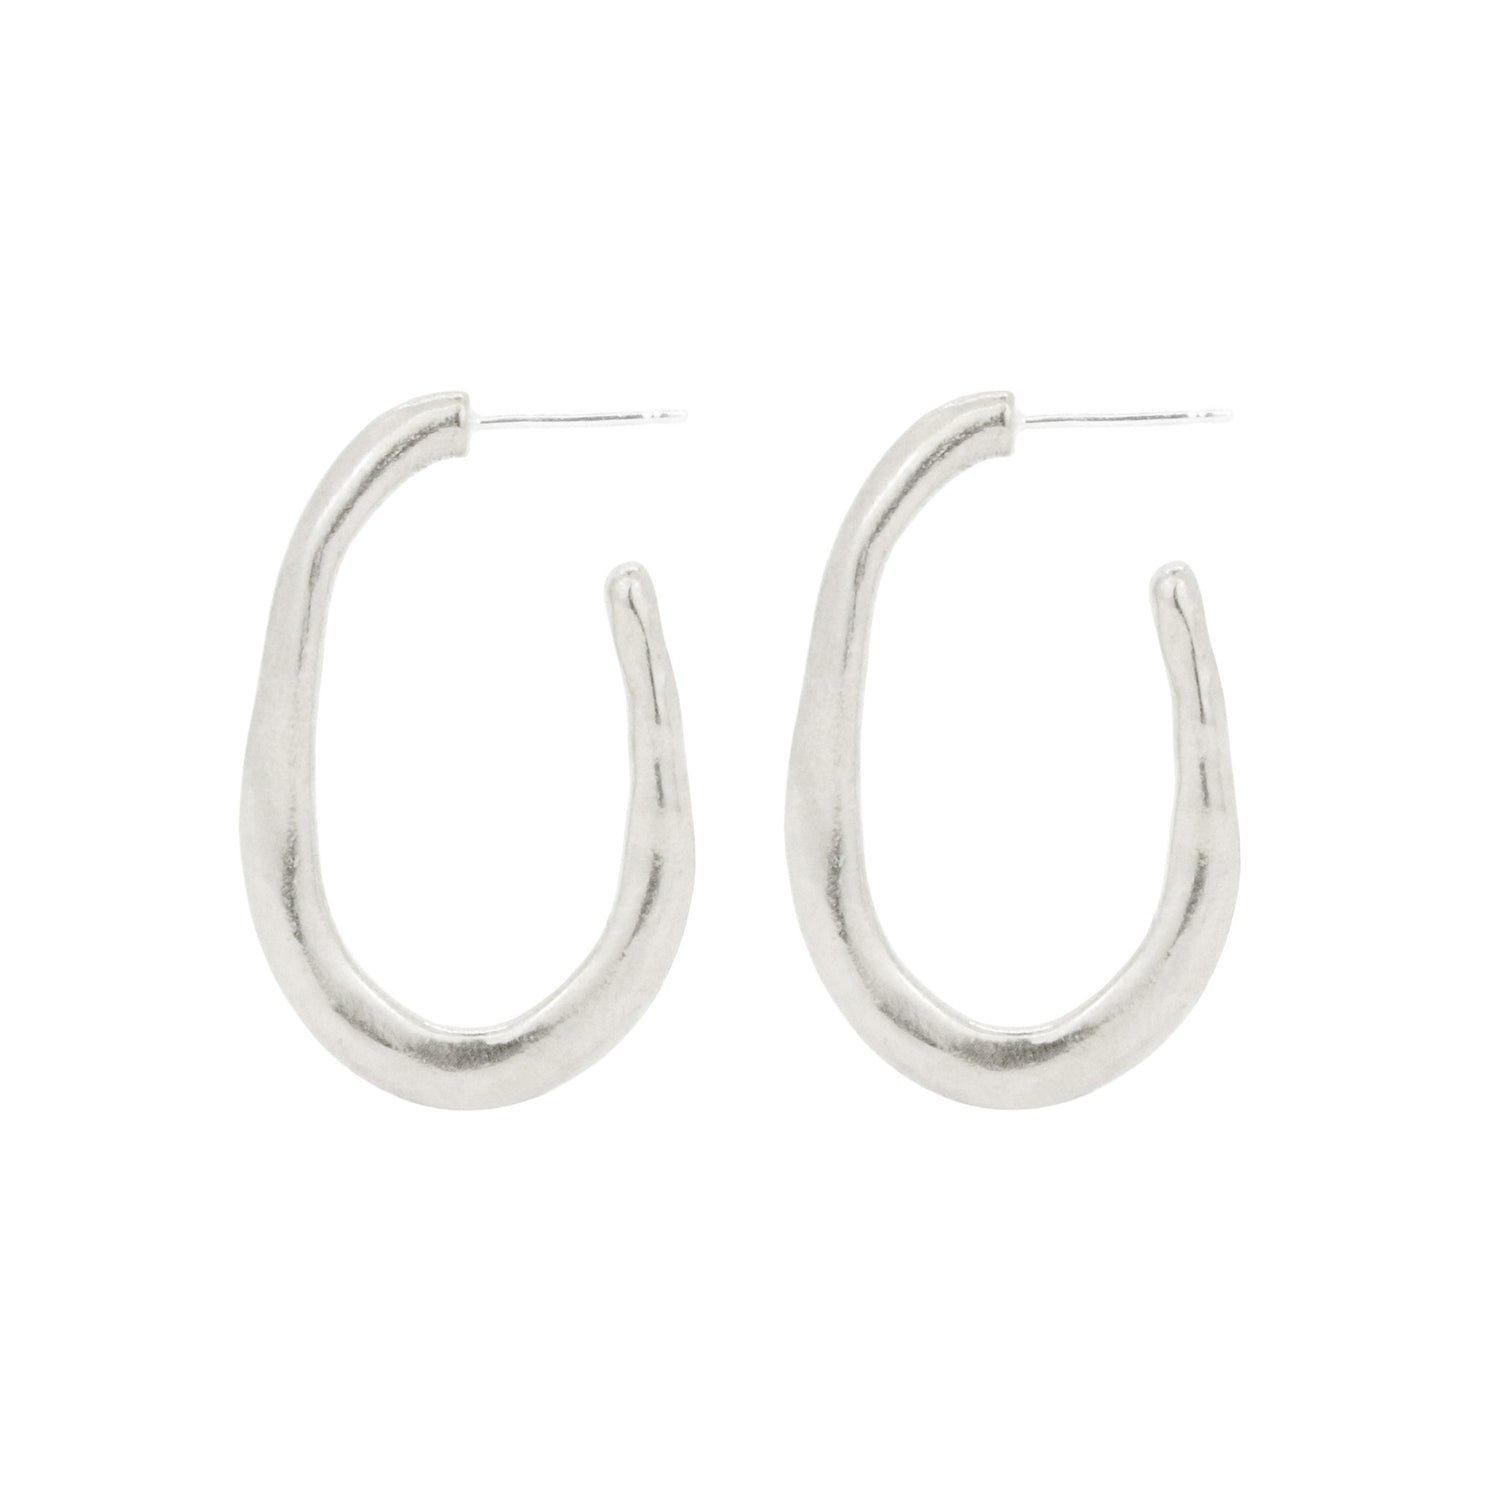 Amanda Hunt Lake Hoops The perfect everyday hoop inspired by the organic shape of lakes. Hand cast in Sterling Silver.